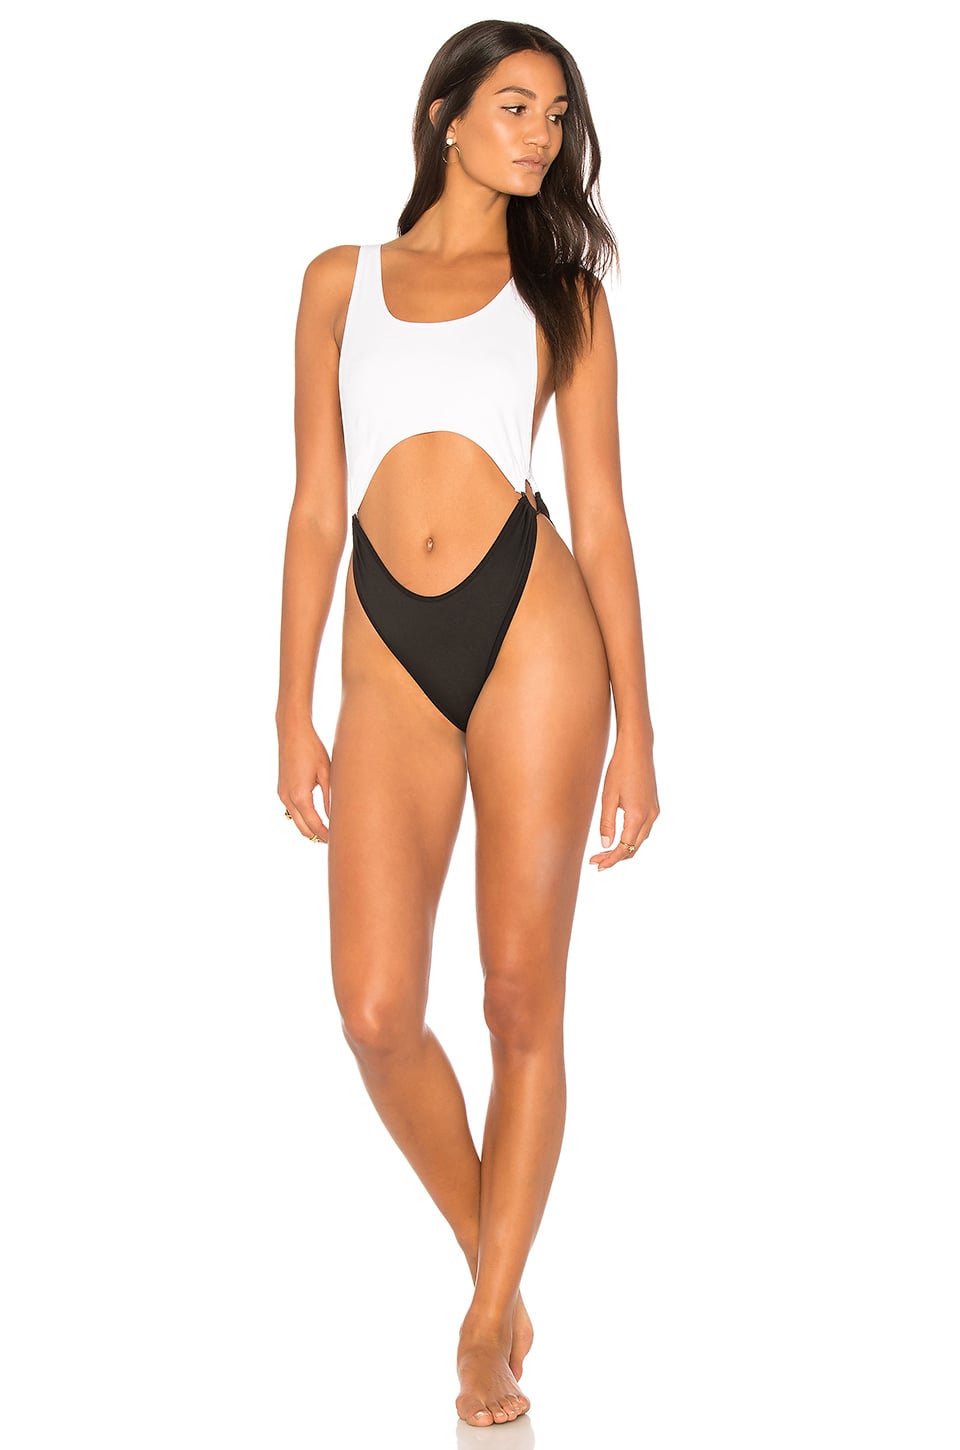 Kendall Kylie X Revolve Cutout One Piece 135 Hands Down These Are The Most Stylish Celebrity Bikinigrams Of The Summer Popsugar Fashion Photo 35